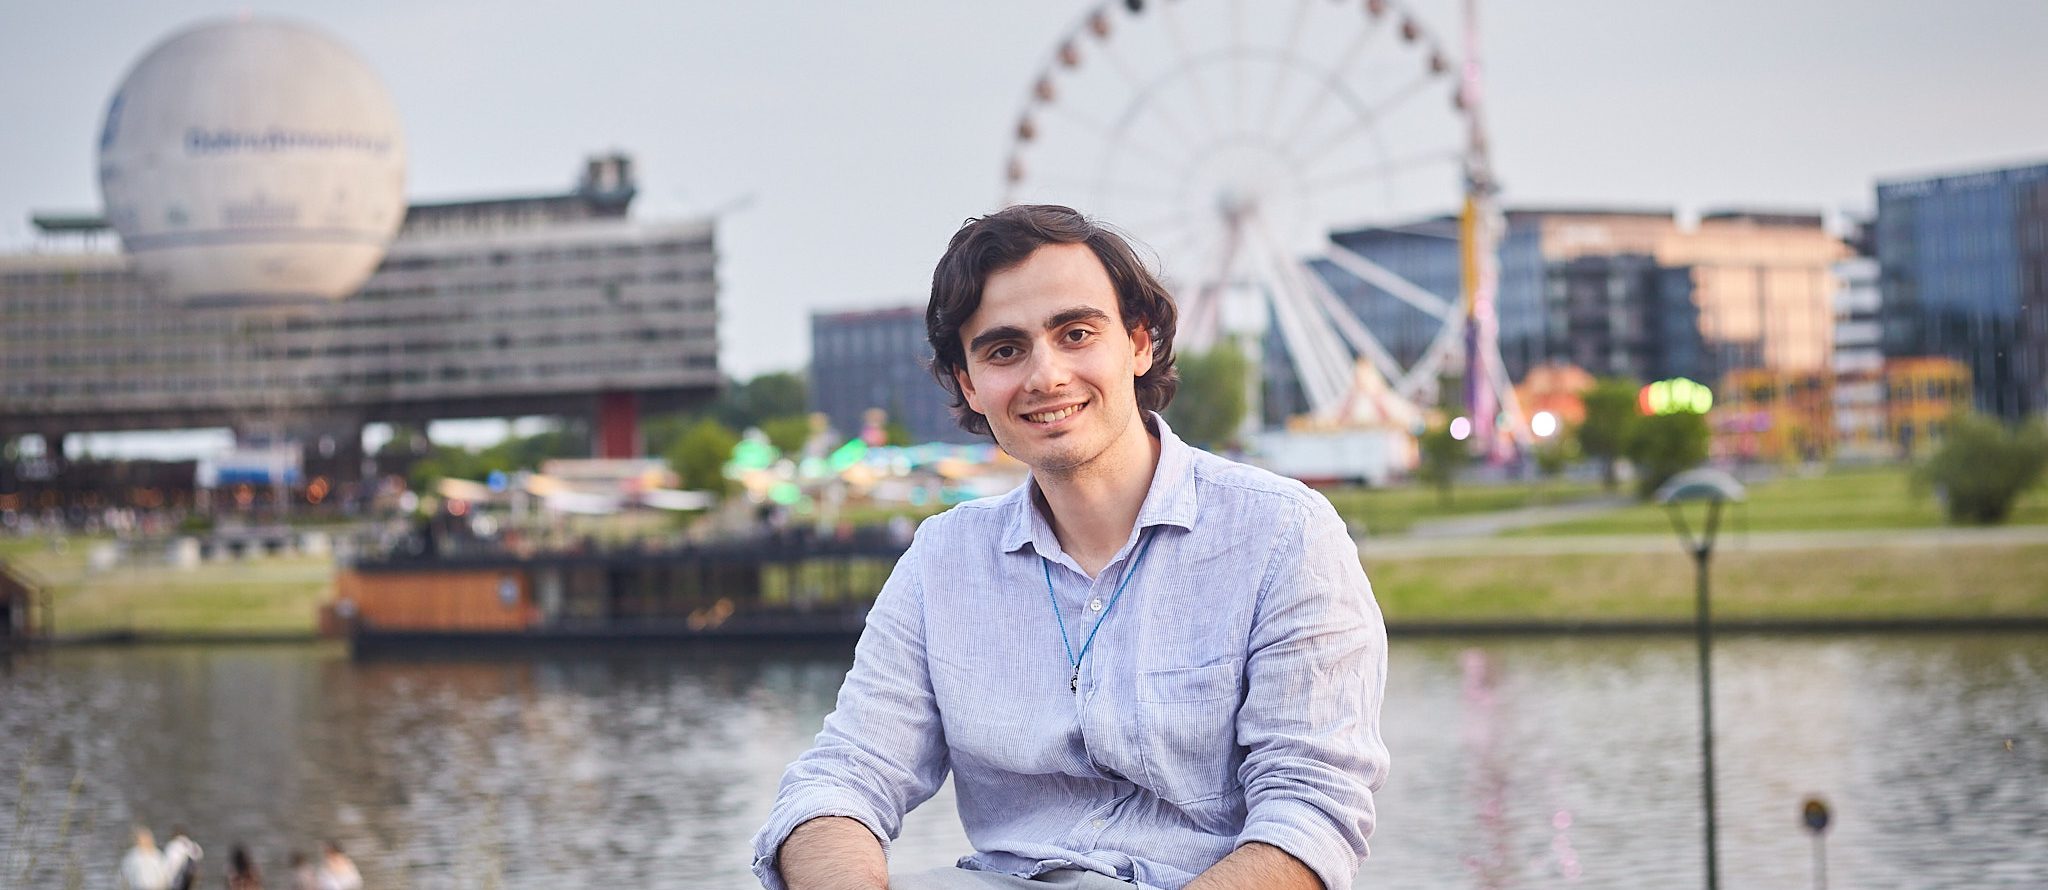 Man seated outside with a river, ferris wheel and buildings in background.